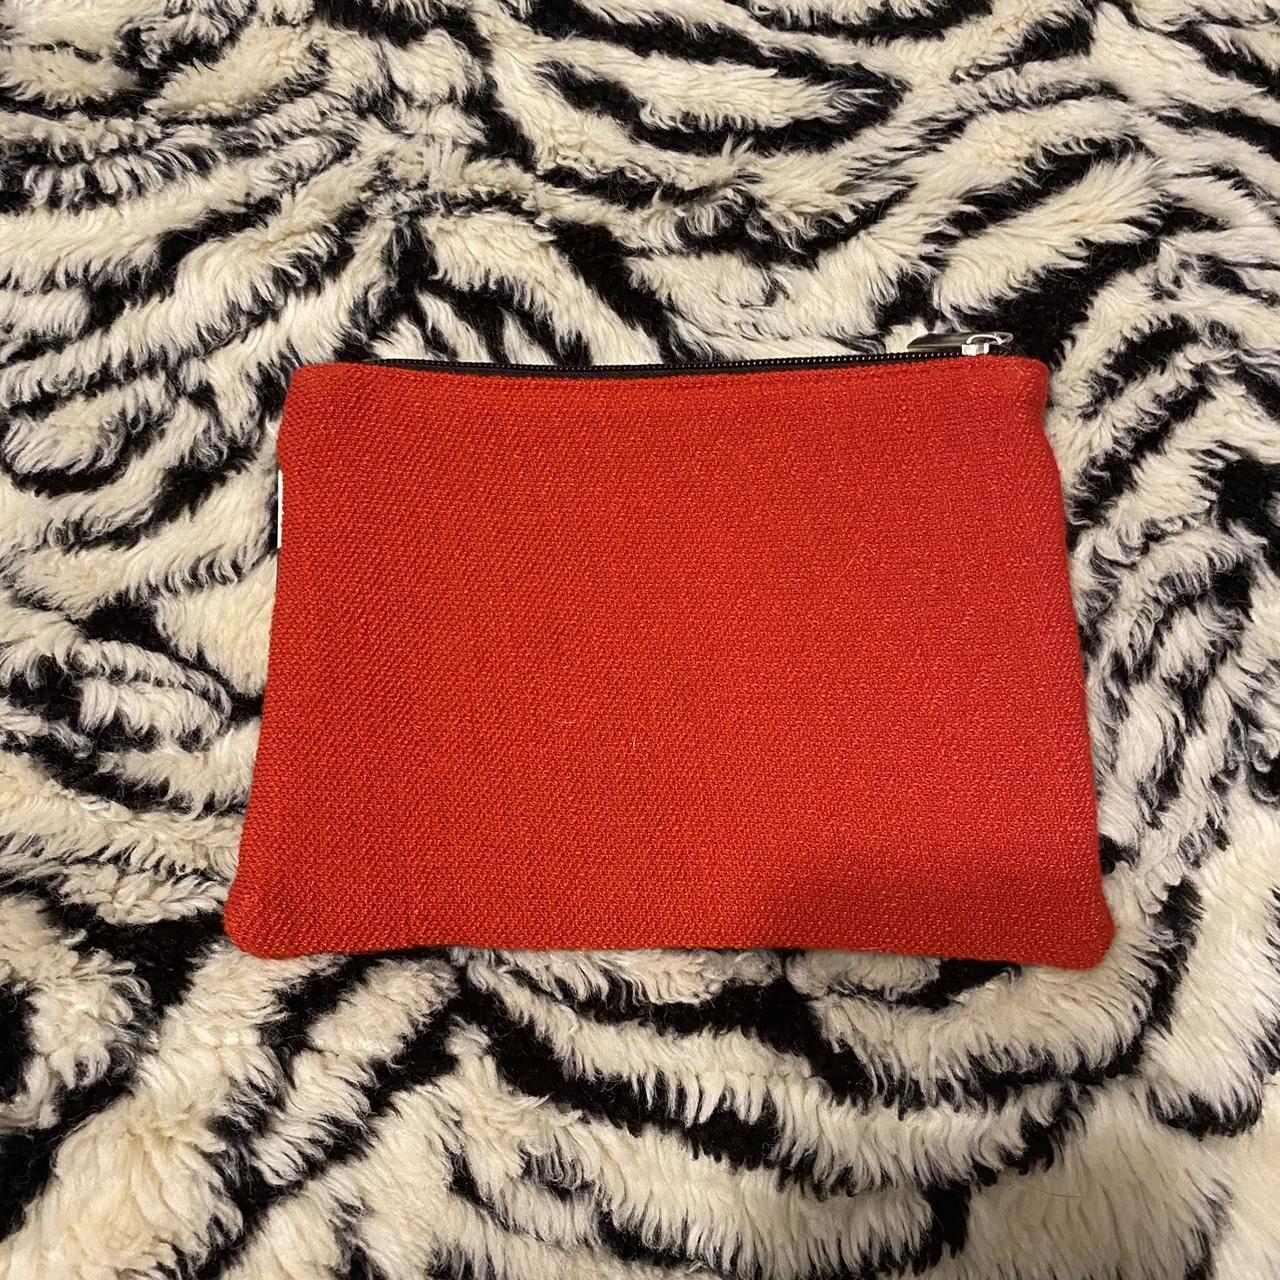 Sephora Women's Black and Red Bag (2)